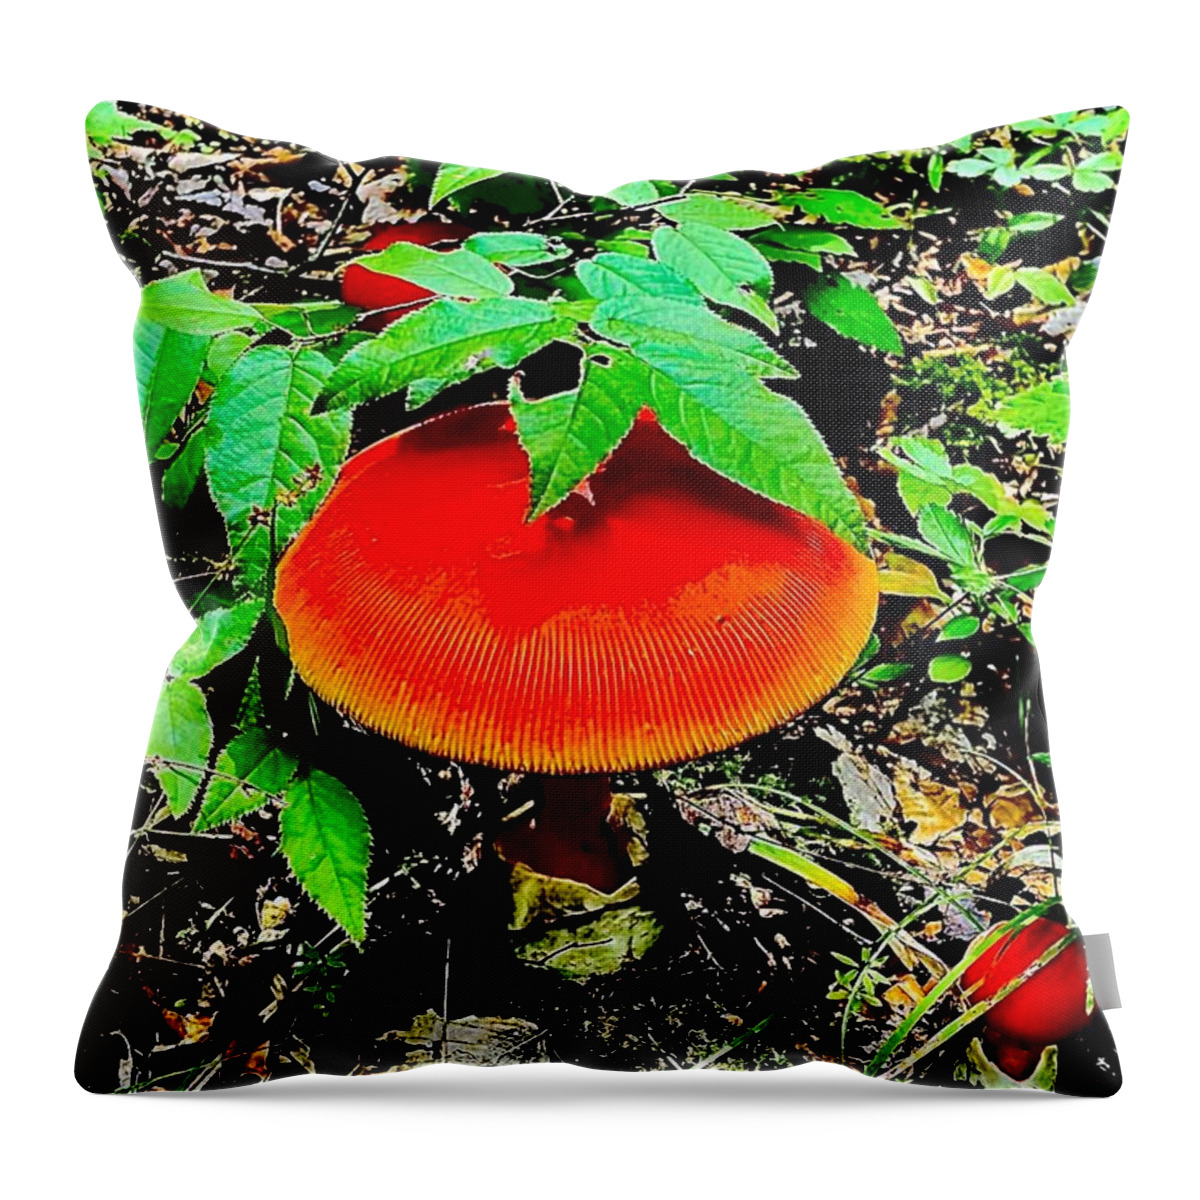 Southern Tier Western New York Frewsburg Usa Cabin Living Throw Pillow featuring the photograph Shrooms by John Anderson